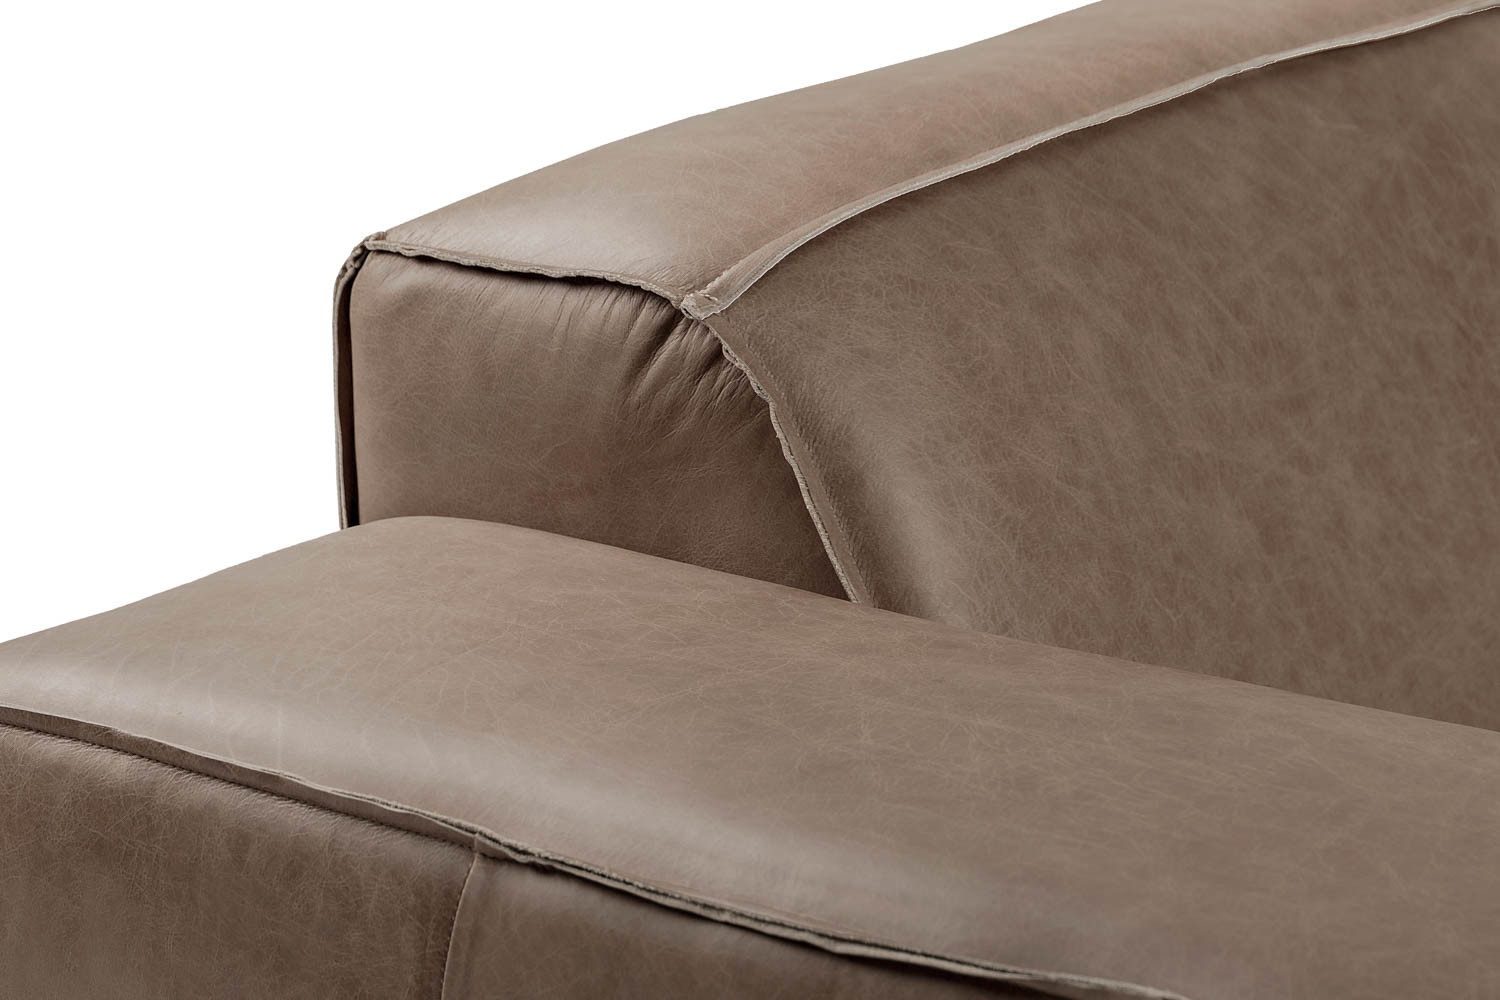 Jagger 2 Seater Leather Couch - Smoke